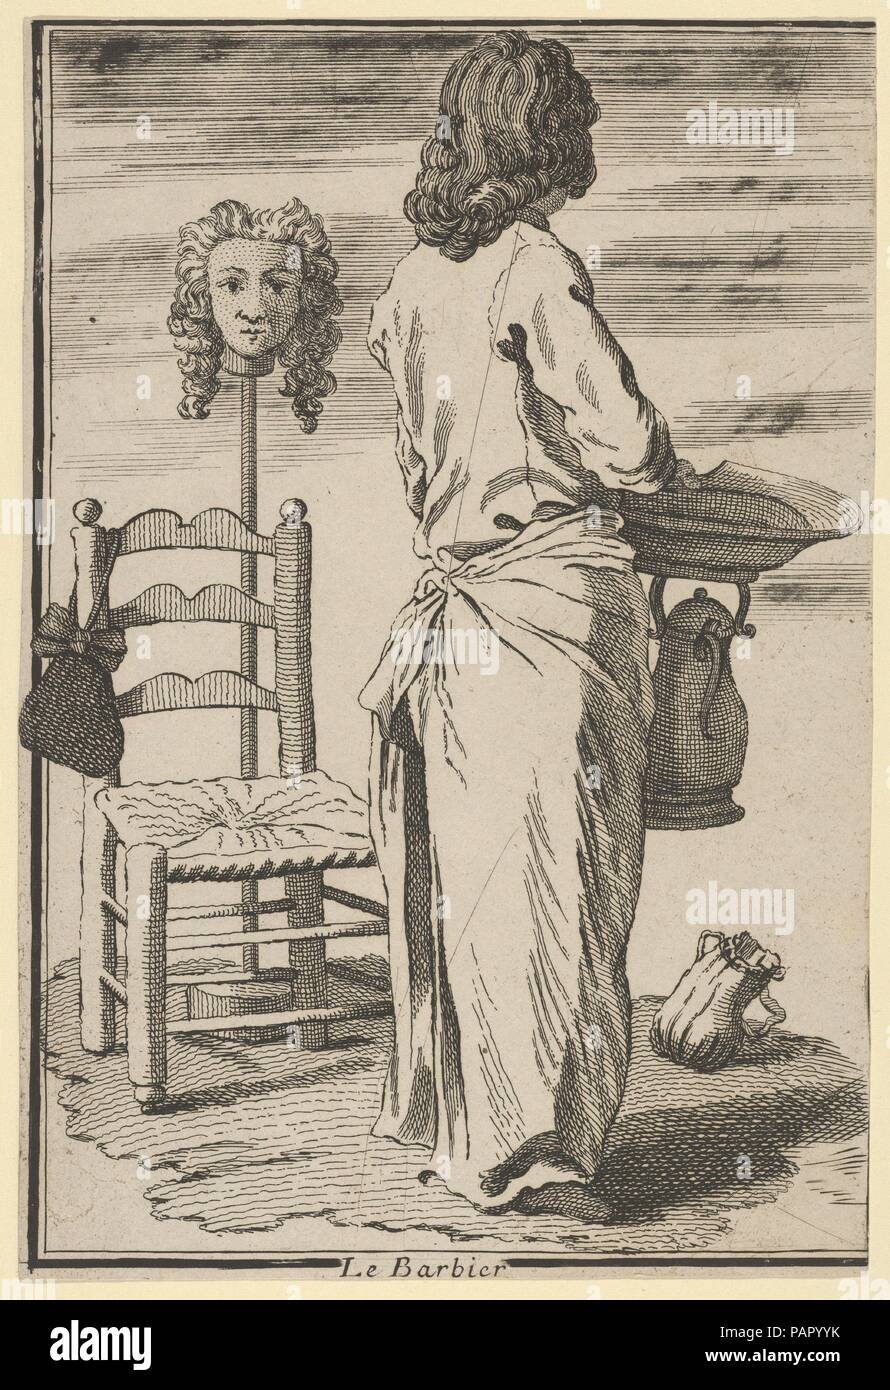 The Barber. Artist: Anonymous, French, 18th century; After Edme Bouchardon (French, Chaumont 1698-1762 Paris). Dimensions: Sheet: 9 1/4 × 6 1/4 in. (23.5 × 15.9 cm). Date: after 1742. Museum: Metropolitan Museum of Art, New York, USA. Stock Photo